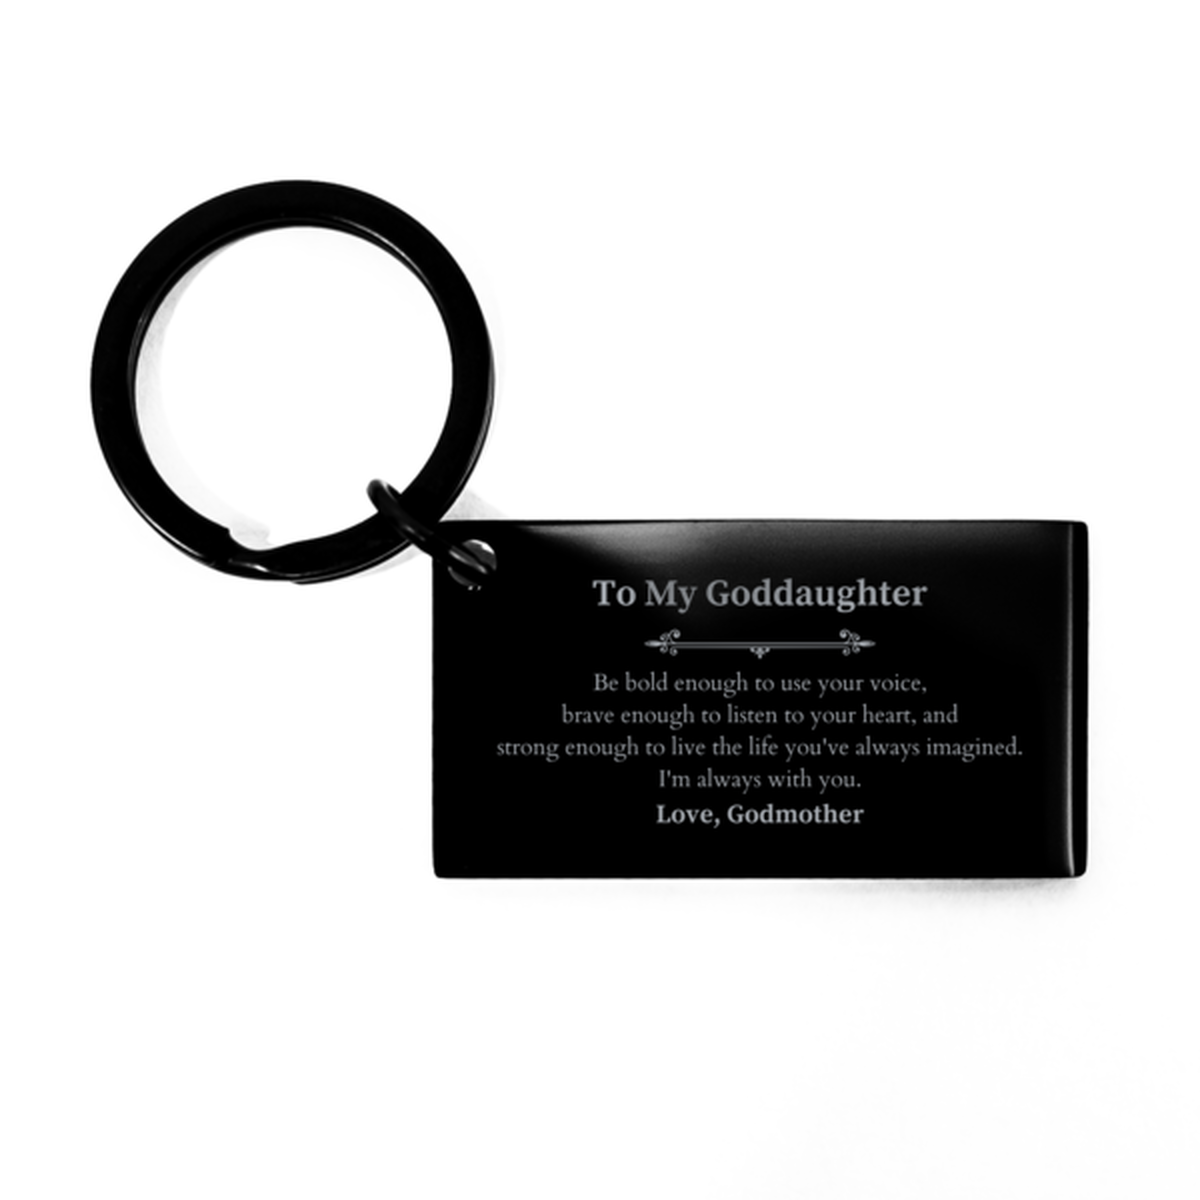 Keepsake Goddaughter Keychain Gift Idea Graduation Christmas Birthday Goddaughter from Godmother, Goddaughter Be bold enough to use your voice, brave enough to listen to your heart. Love, Godmother